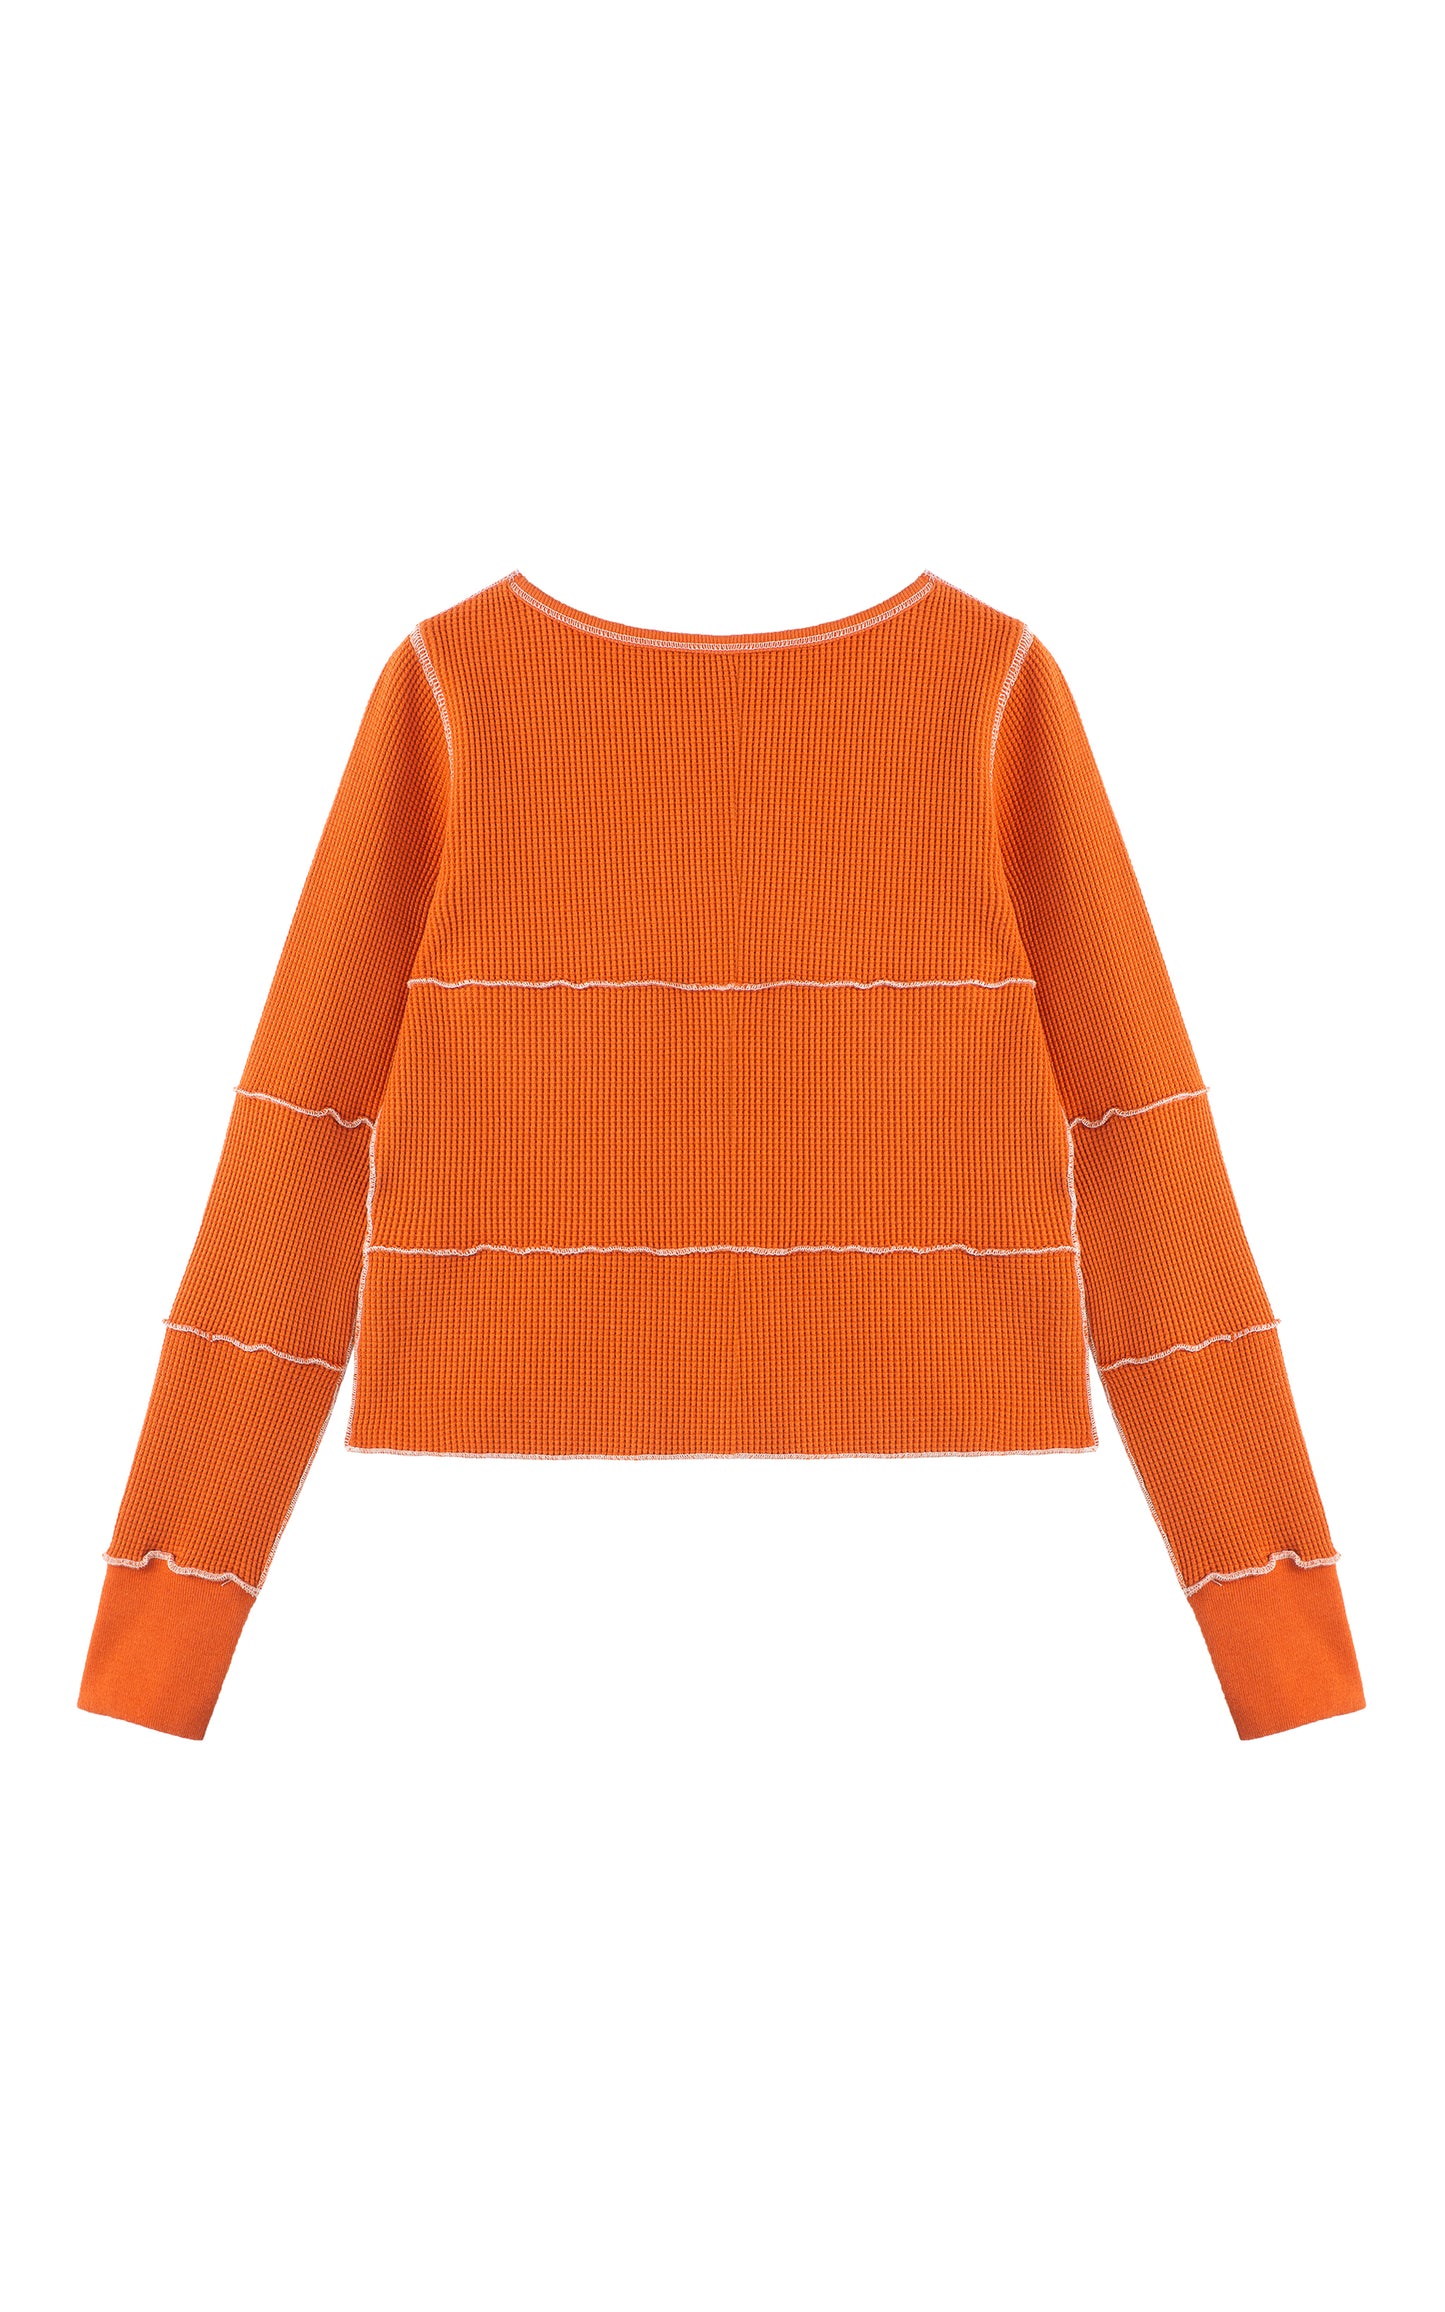 Back view of orange long sleeve with white stitching 